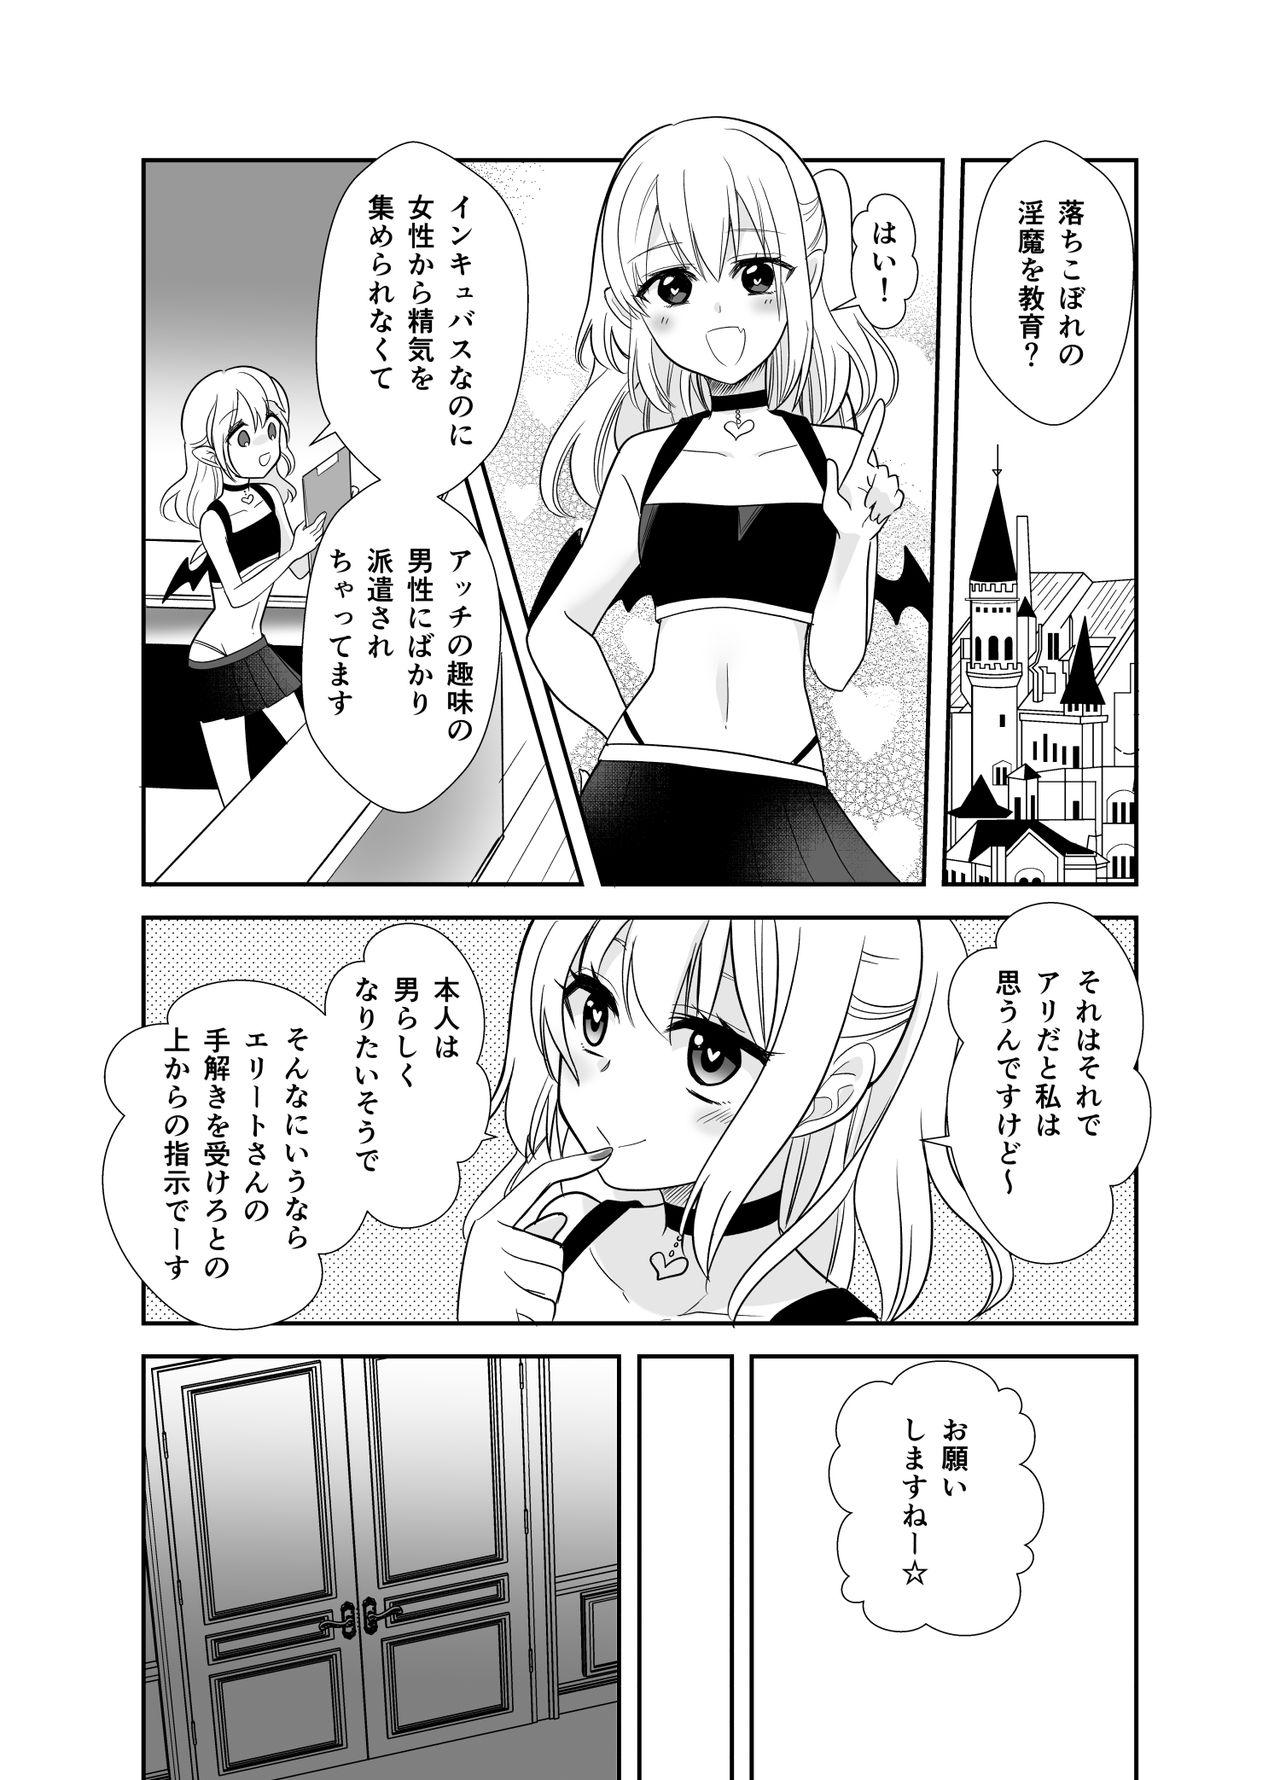 Nice Tits 転生したらエリート淫魔でした - Original Striptease - Page 3